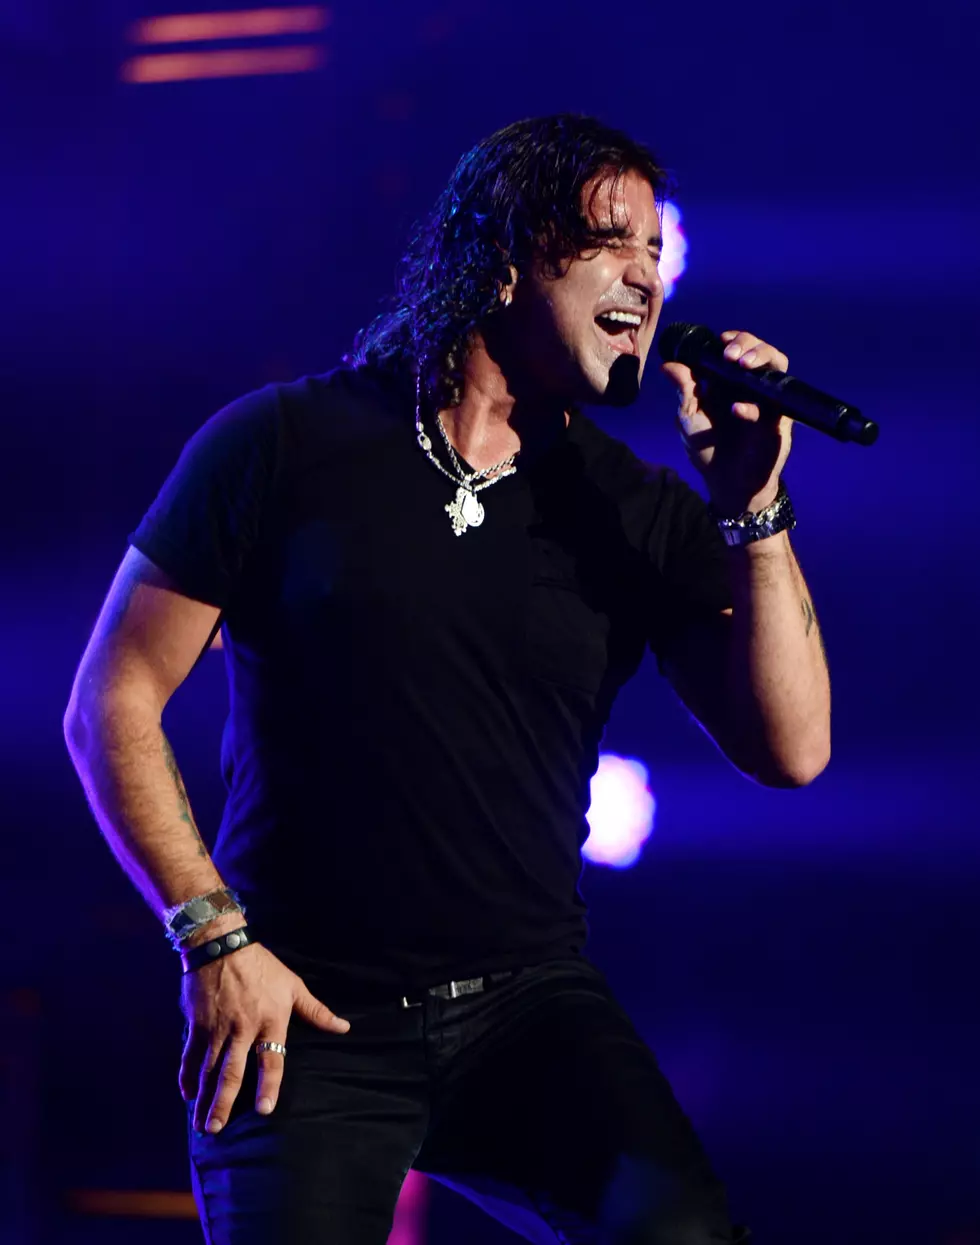 Scott Stapp’s ‘Proof of Life’ World Tour Coming to Sioux Falls